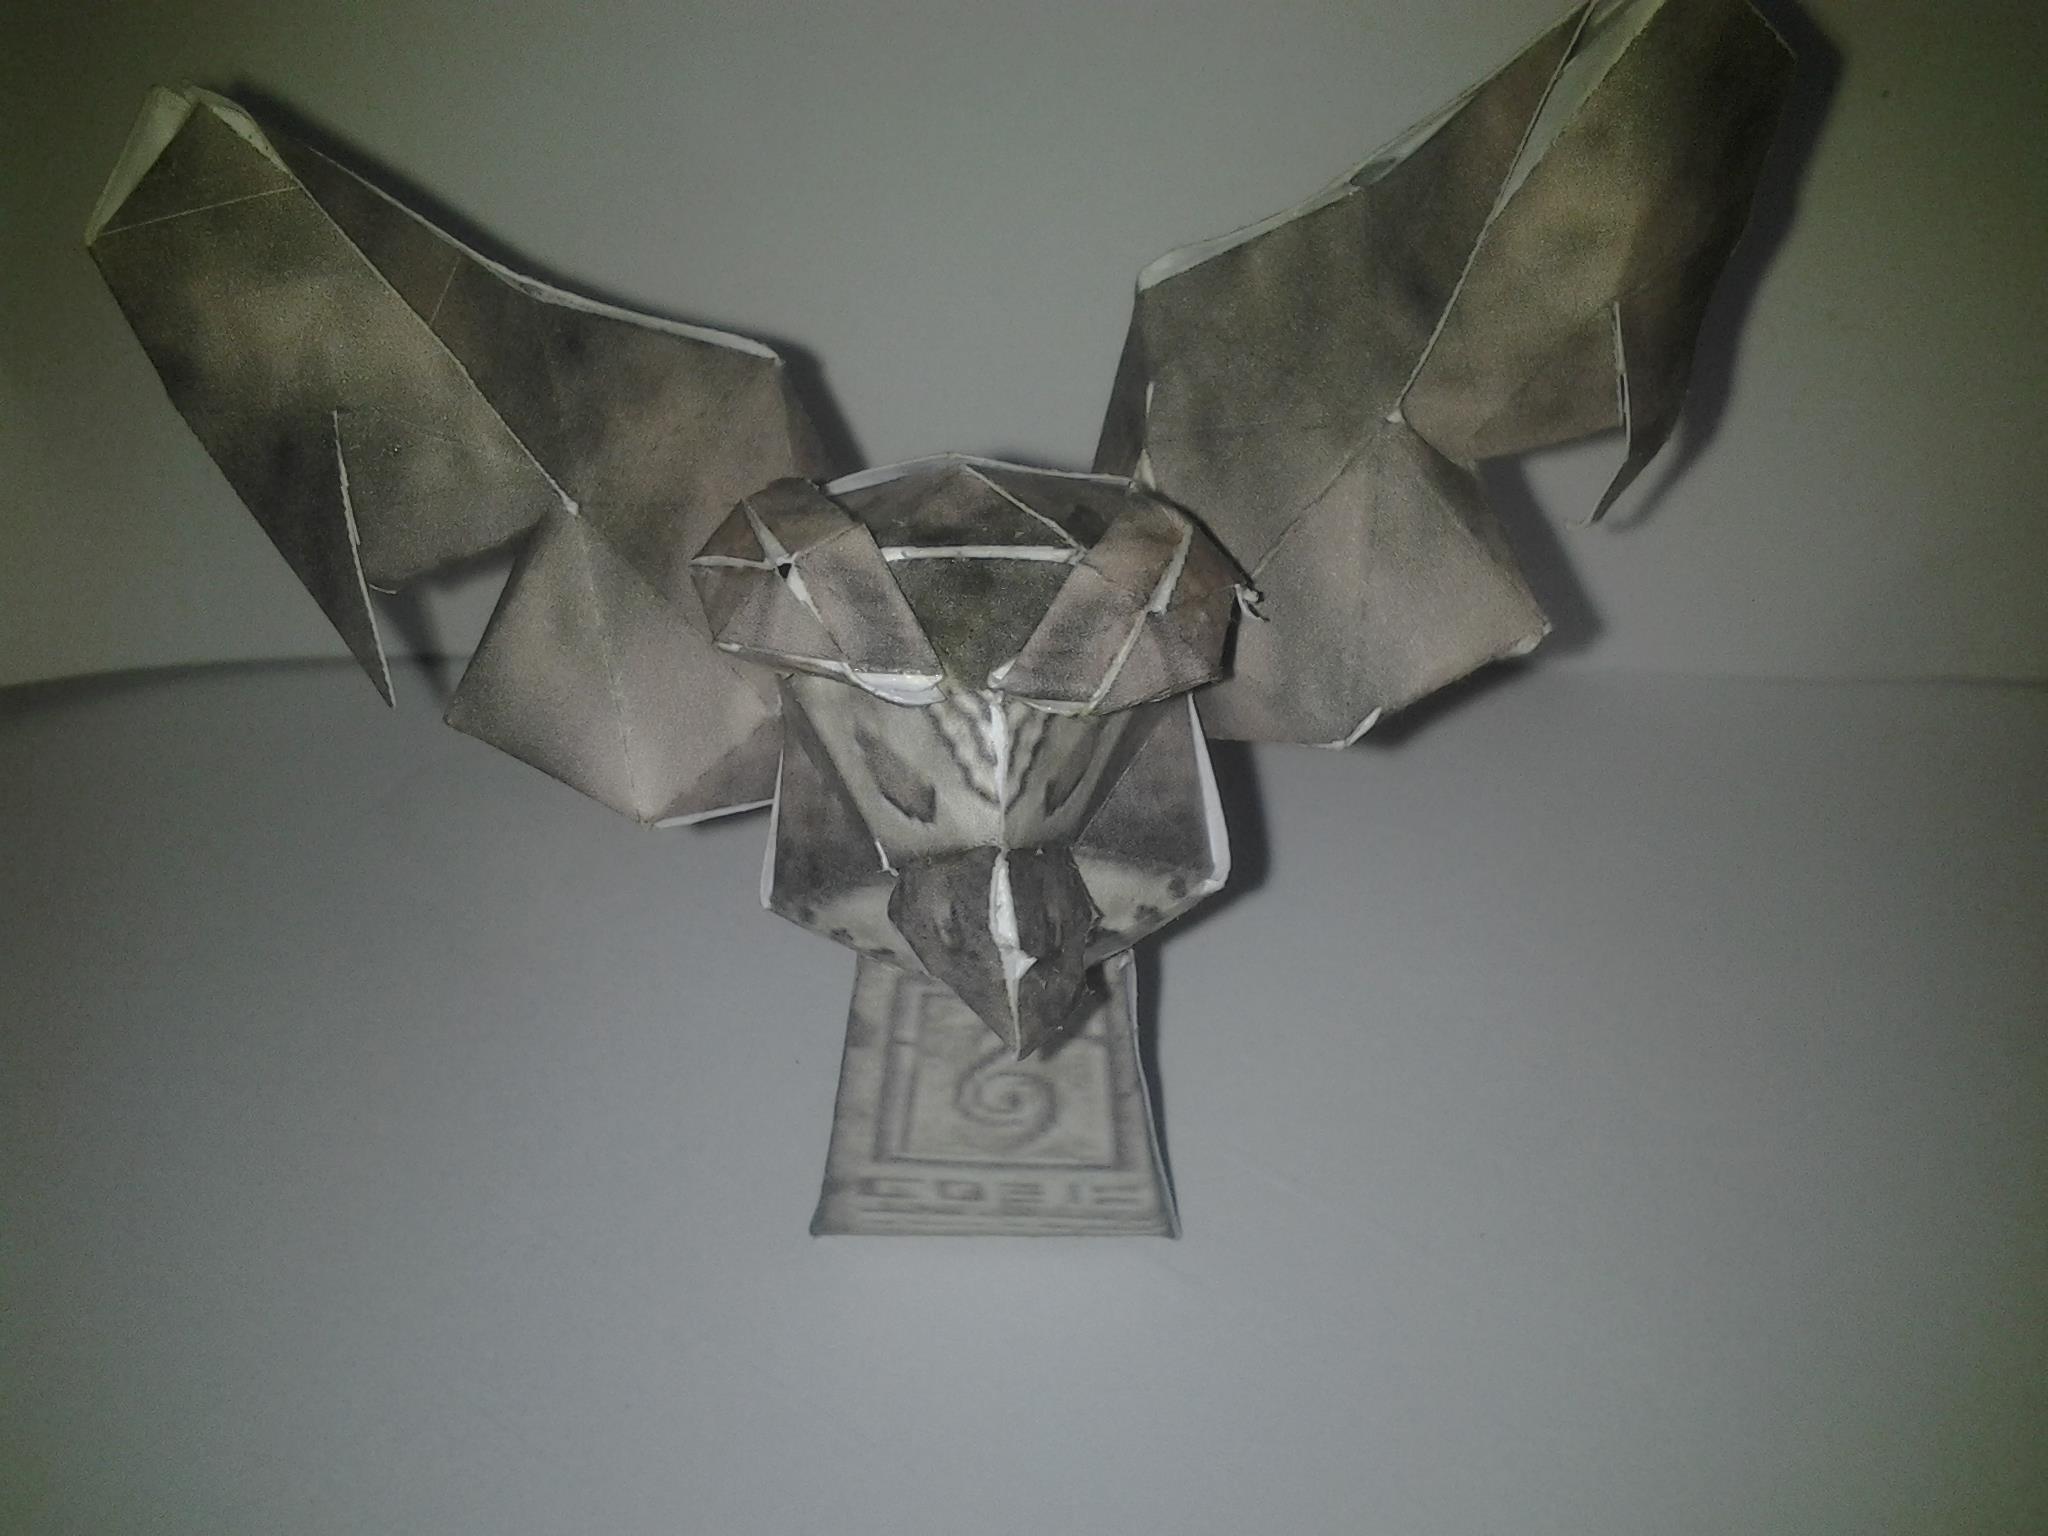 I made the owl statue from majora's mask out of paper